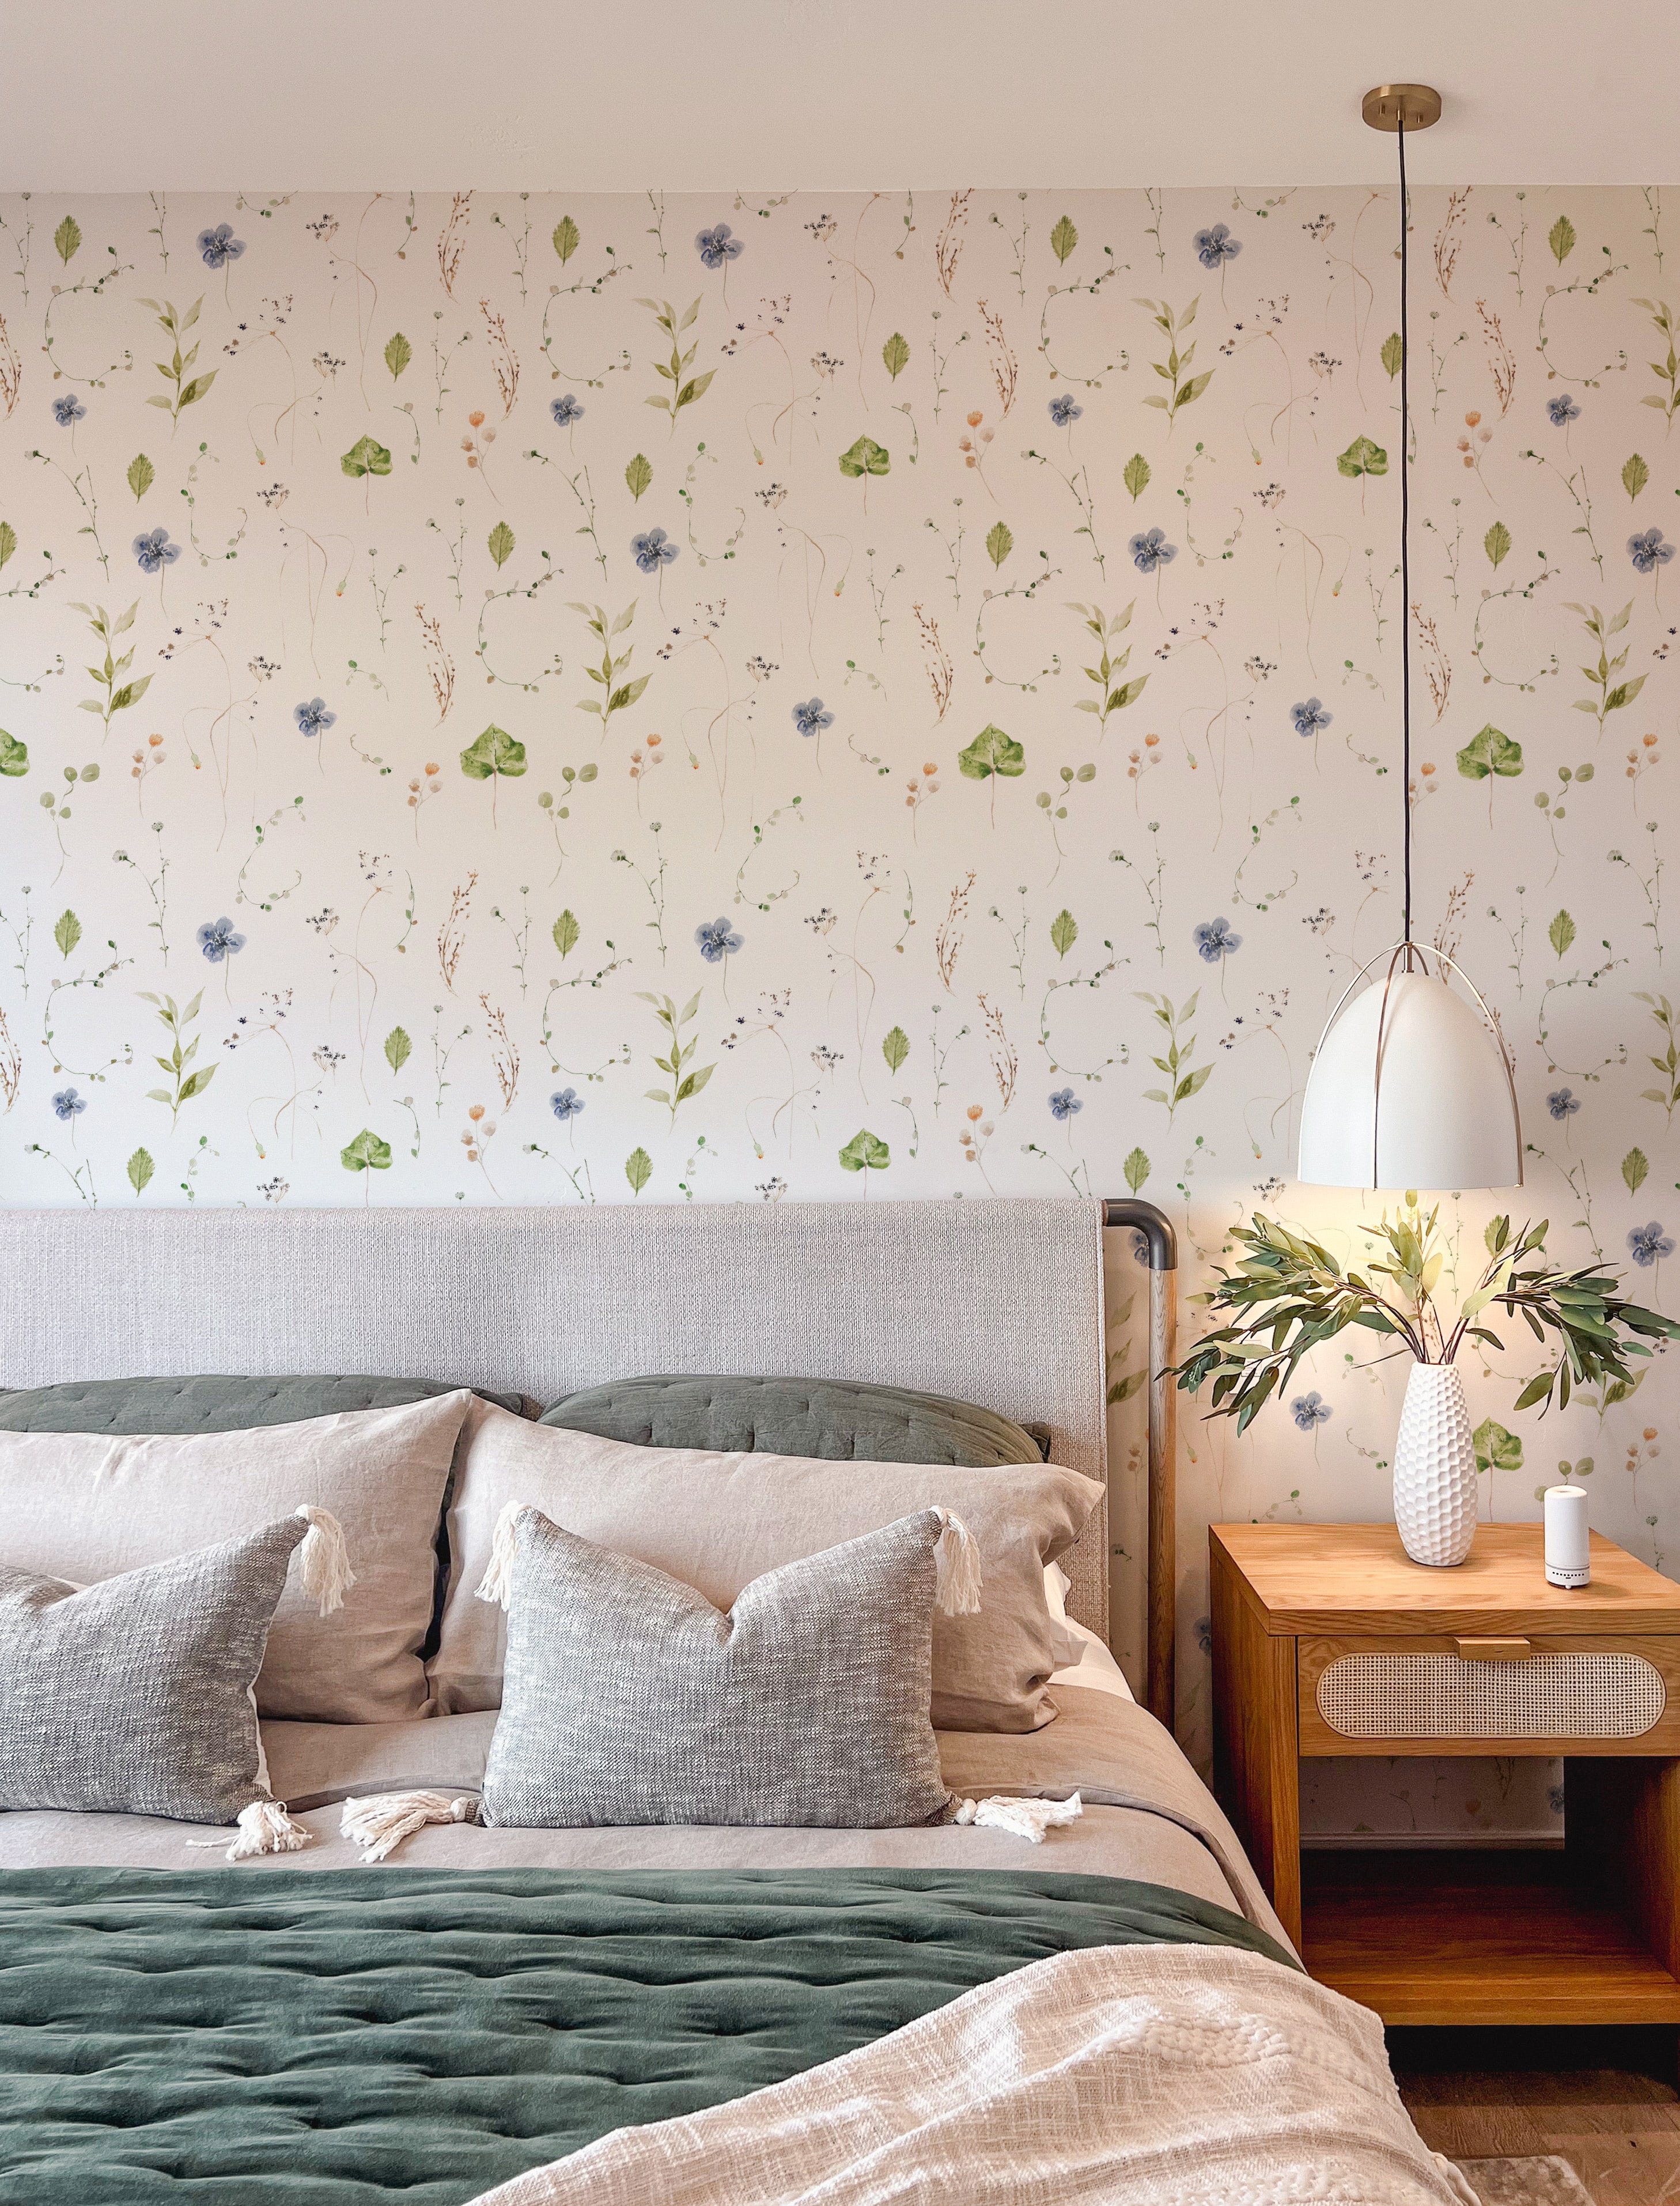 A cozy bedroom with 'Ikebana Floral Wallpaper' enhancing the wall behind a bed with plush green and gray pillows, with the natural floral pattern contributing to a restful ambiance.